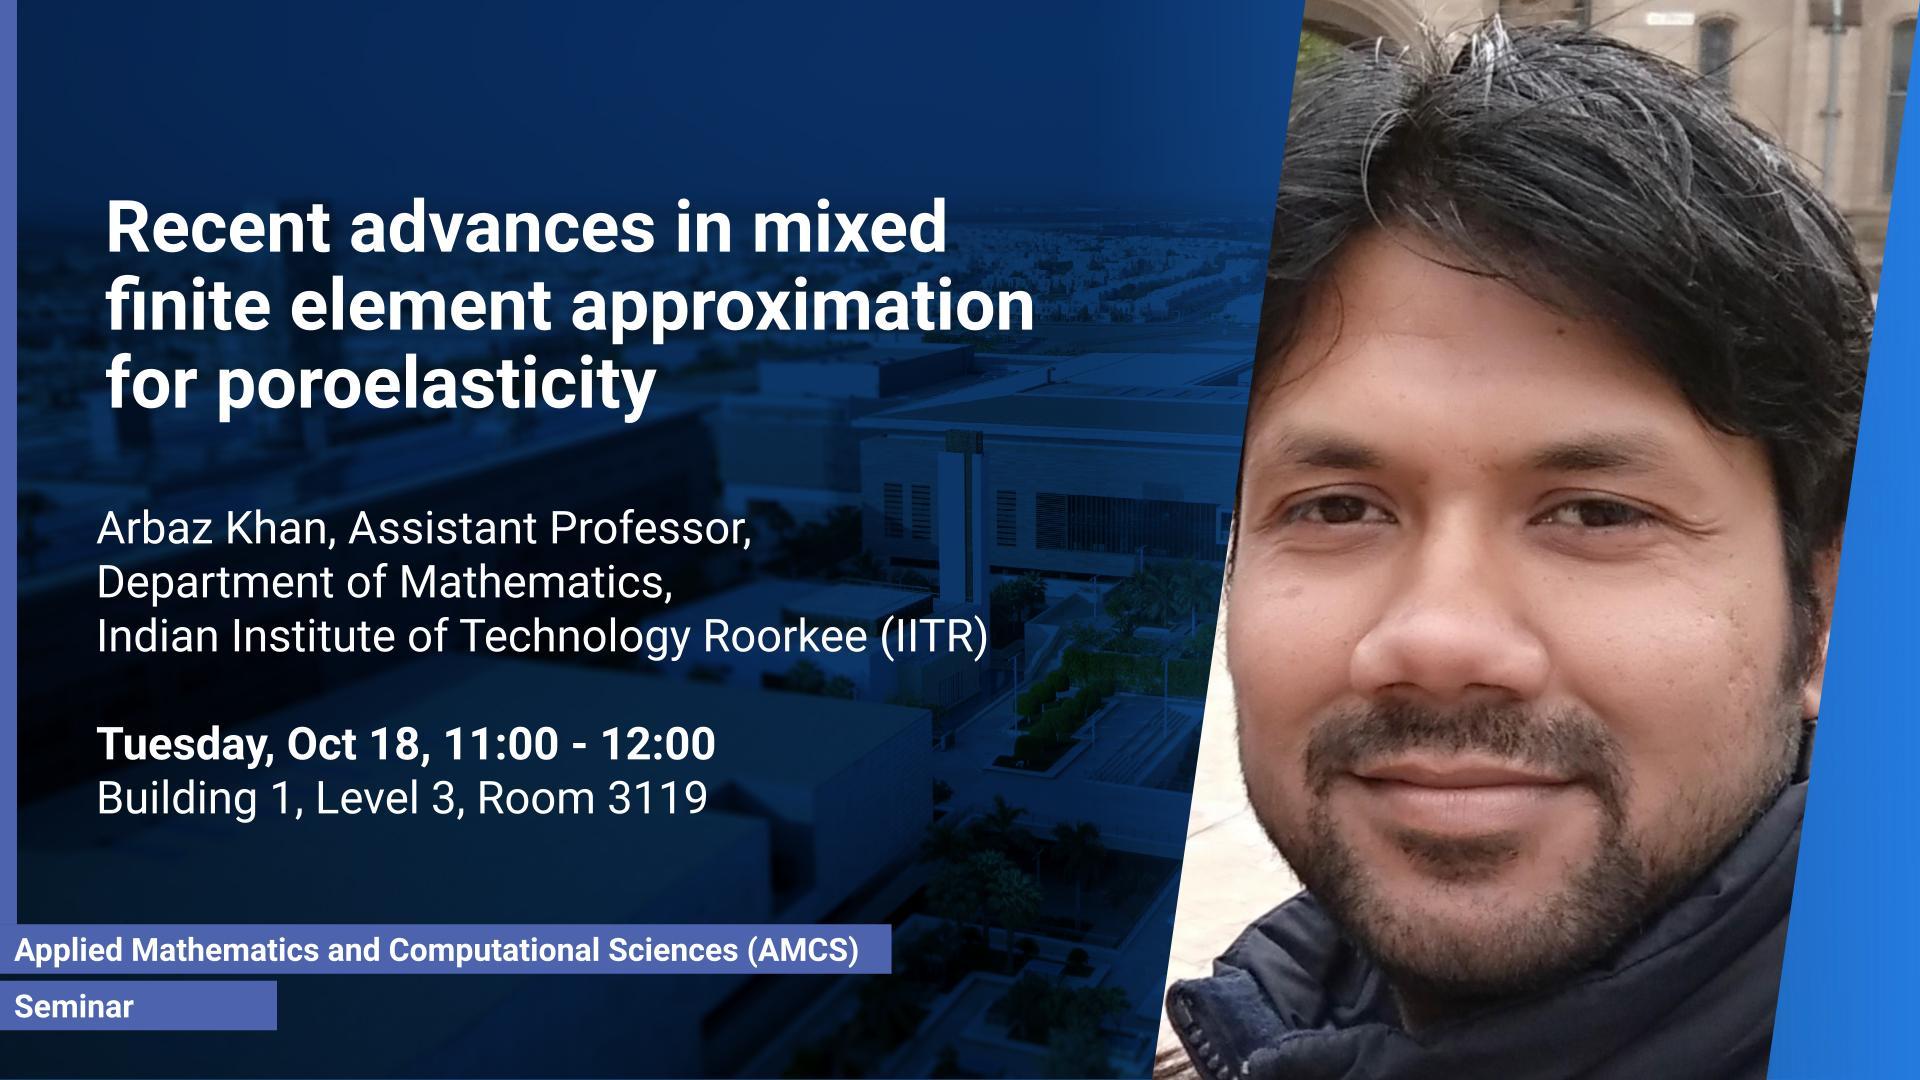 KAUST-CEMSE-AMCS-Seminar-Arbaz-Khan-Recent-Advances-In-Mixed-Finite-Element-Approximation-For-Poroelasticity.